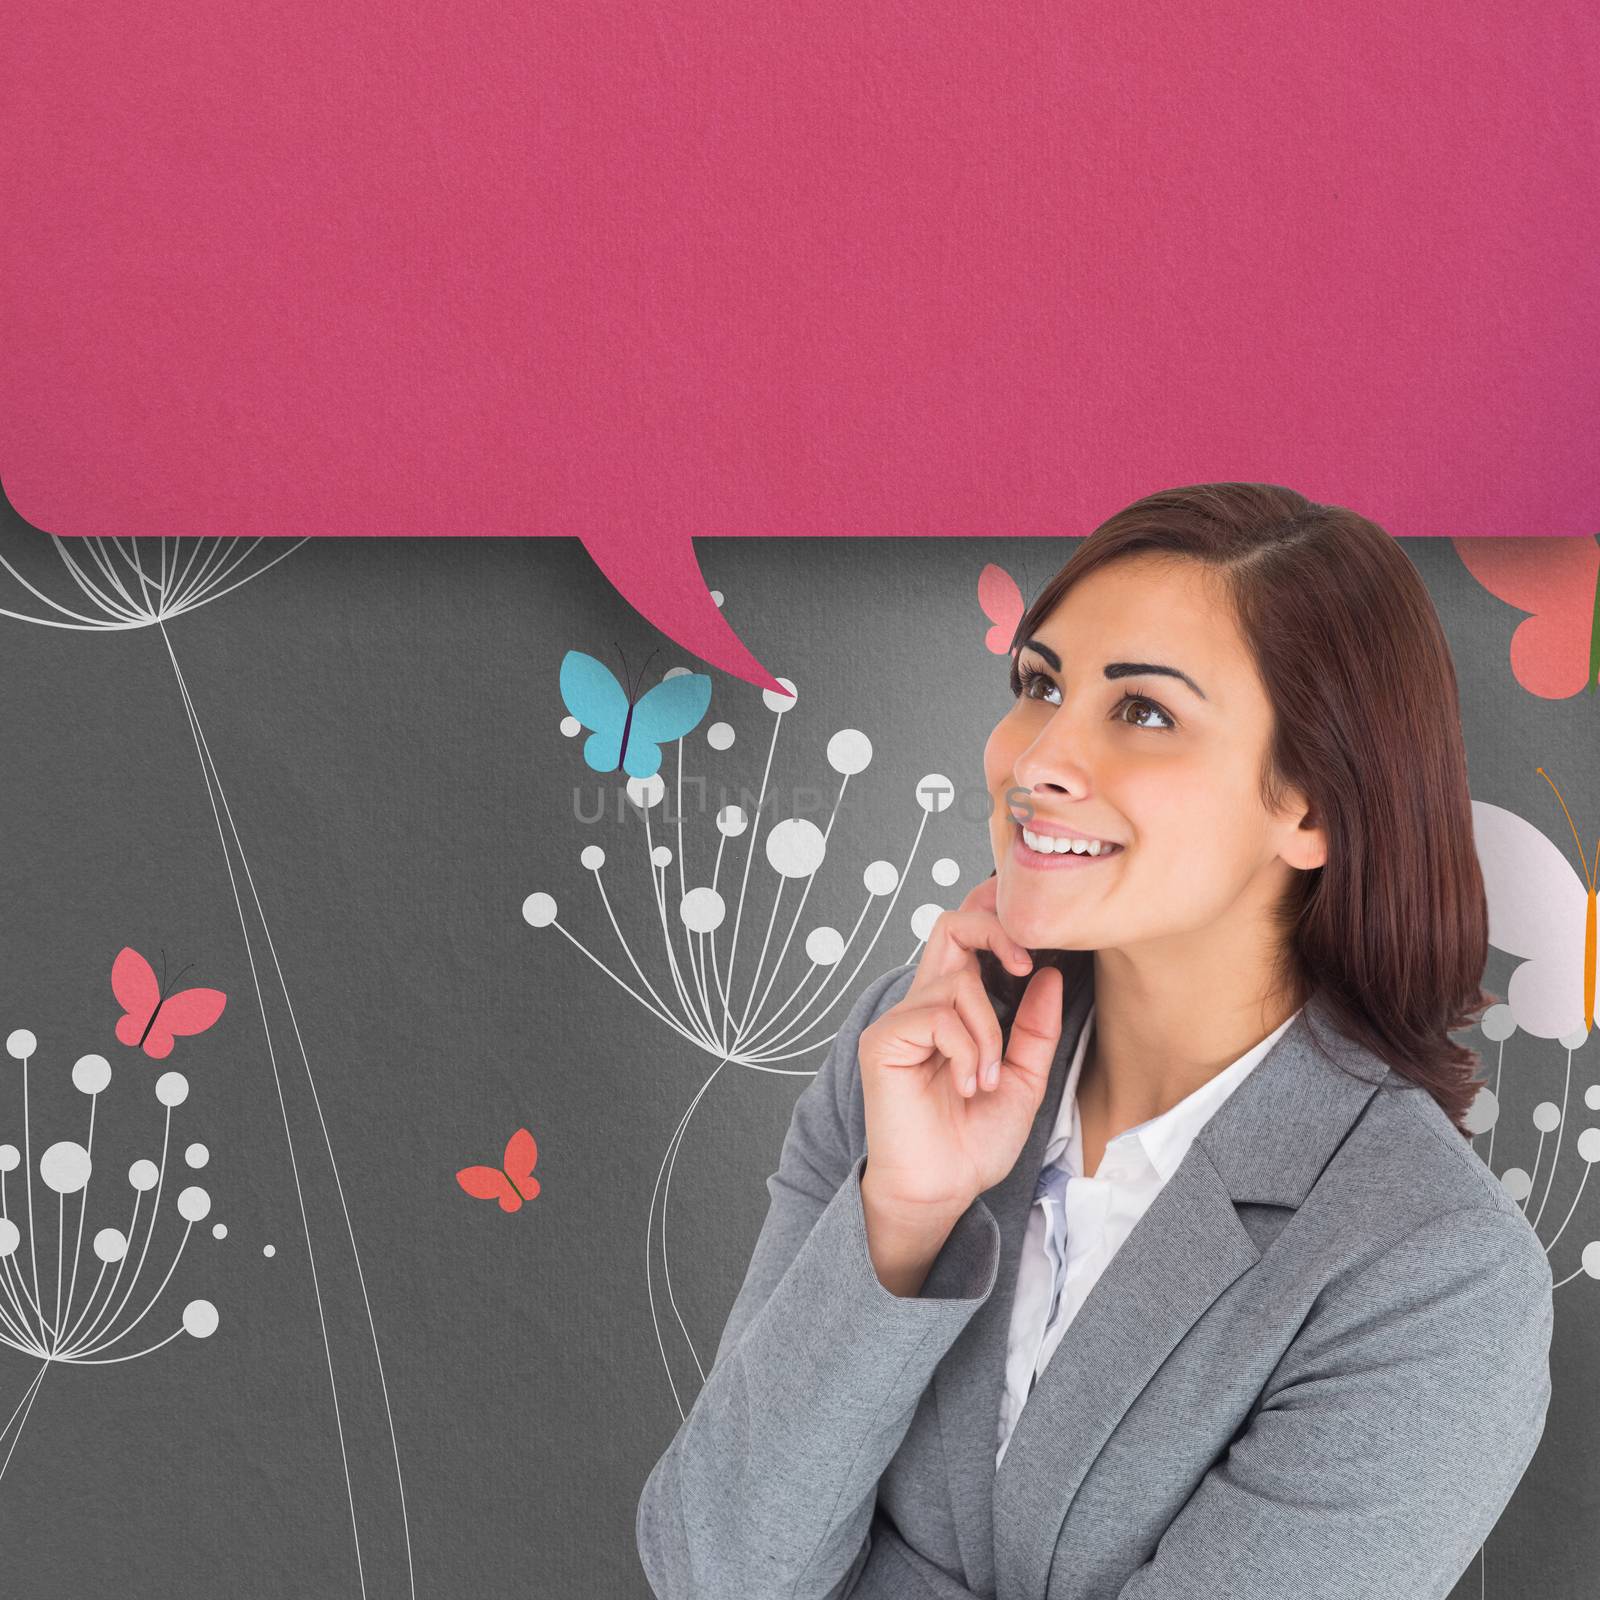 Smiling thoughtful businesswoman with speech bubble against colourful butterflies and dandelions